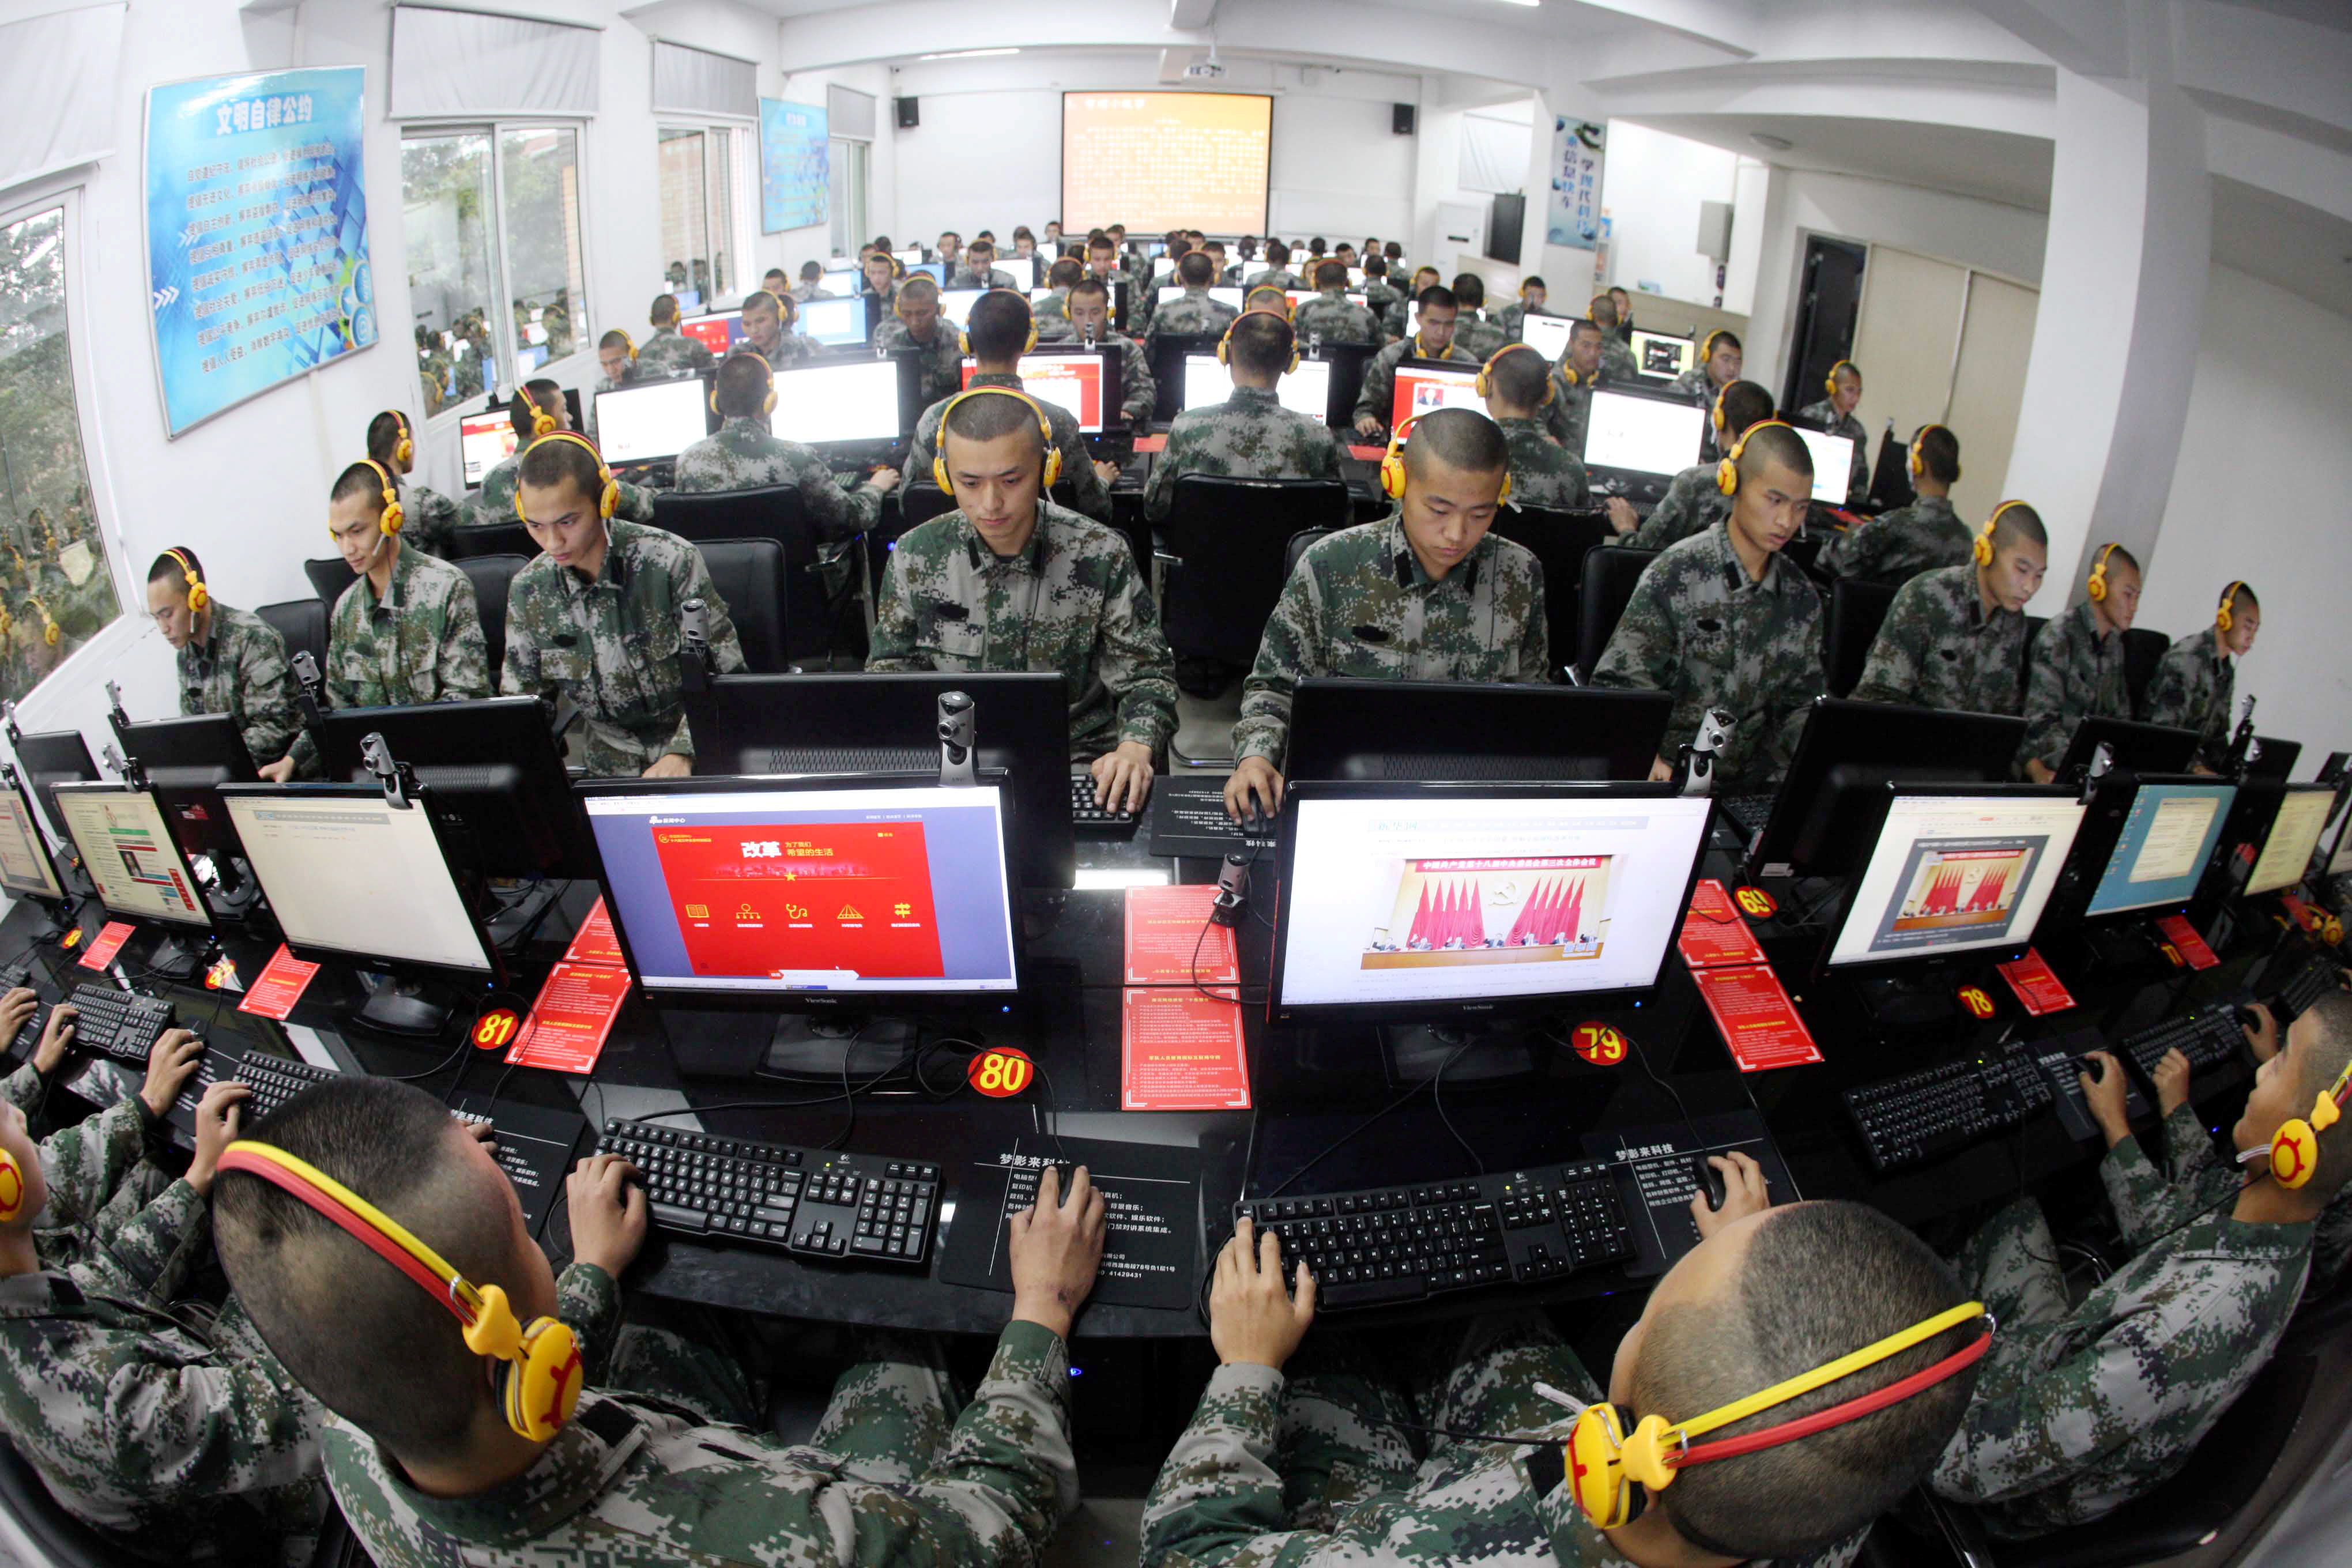 --FILE--Chinese soldiers browse online news on desktop computers at a garrison of the PLA (People's Liberation Army) in Chongqing, China, 14 November 2013.

Chinese leaders have made the passage of a cybersecurity law a priority for this year, despite protests from the U.S. against the country's growing restrictions on technology firms. Zhang Dejiang, chairman of the standing committee of China's National People's Congress, said in a work report Sunday (8 March 2015) that formulating laws for cybersecurity, antiterrorism and national security were major tasks for 2015. The cybersecurity law, which official media had previously disclosed was in the works, is still being drafted. Details haven't been announced.No Use China. No Use France.